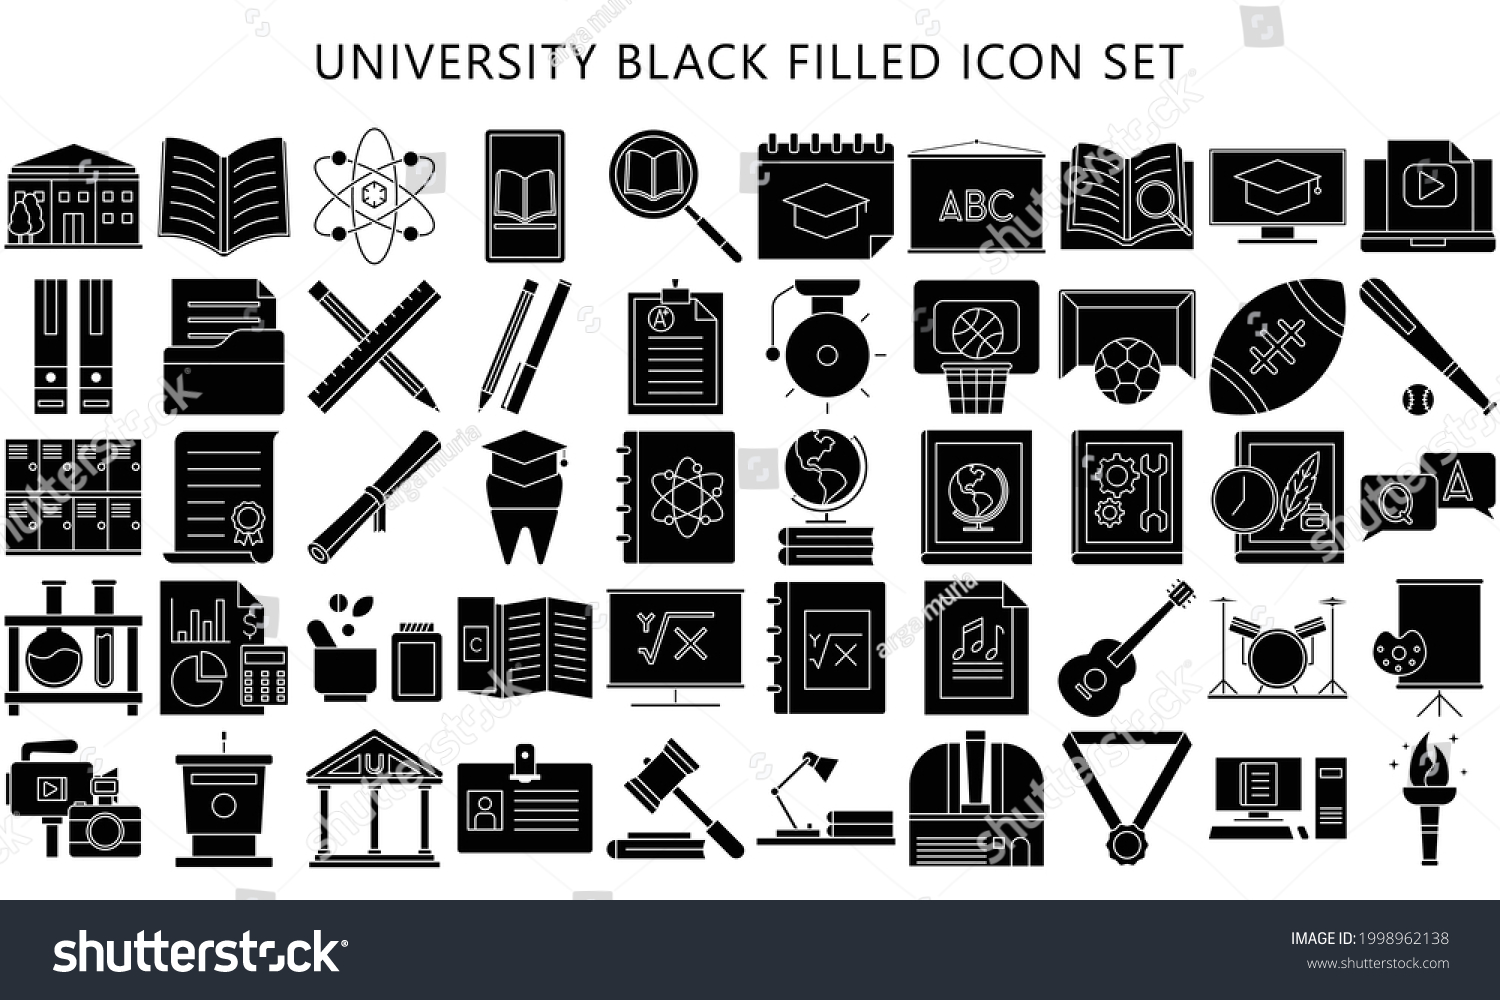 SVG of simple, flat universities and colleges black filled Icon set. Contains Icons any faculty, chemistry. physics, sports mathematics, economic, accounting and others. EPS 10 ready convert to SVG svg